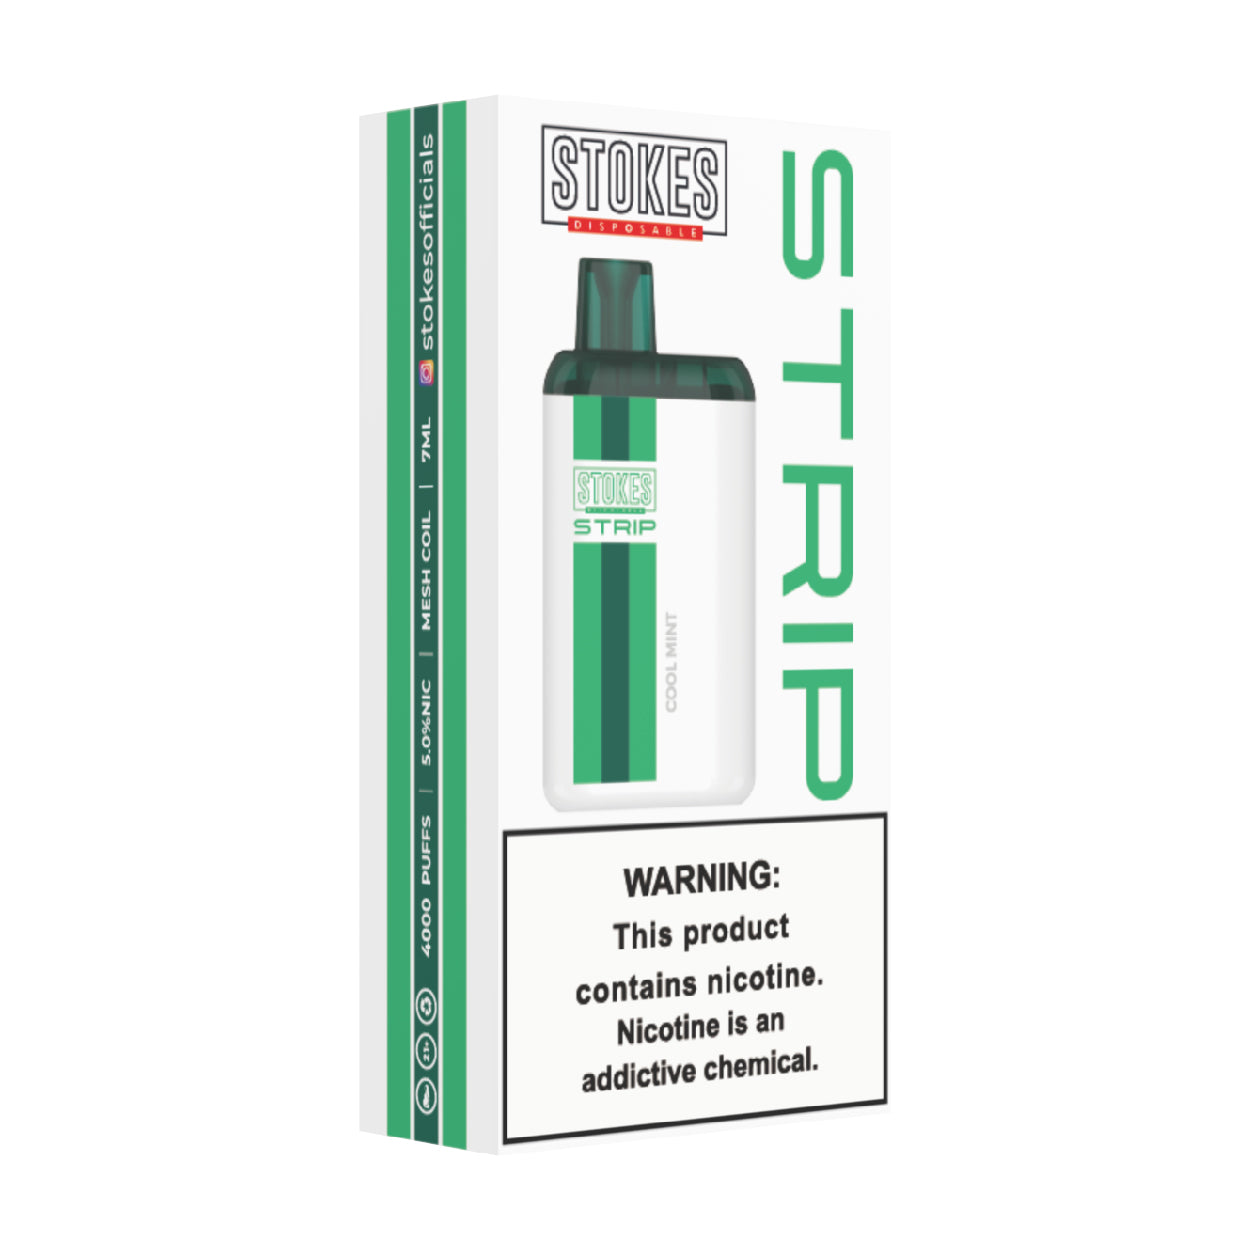 STOKES Strip - 5% Nic. (Disposable Device) - 4000 Puffs - Cool Mint